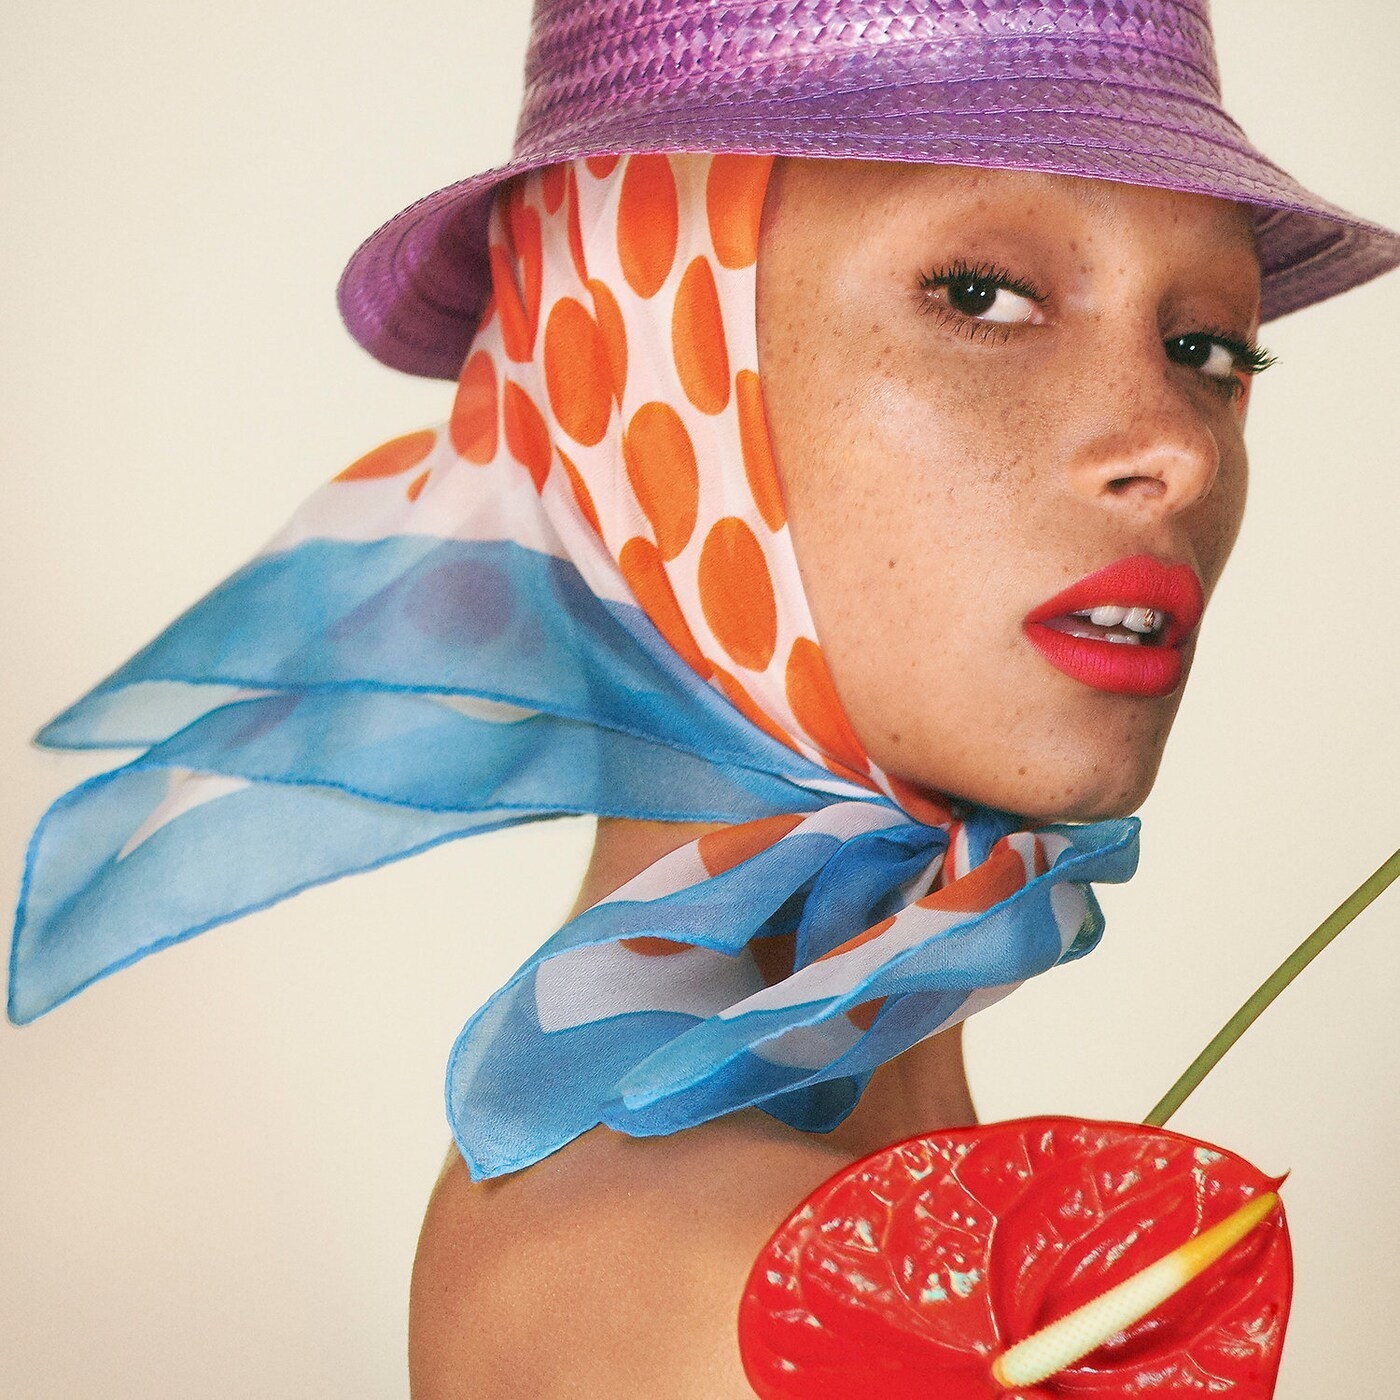 Model wearing red lipstick and blue, orange and white scarf with purple hat holding red flower